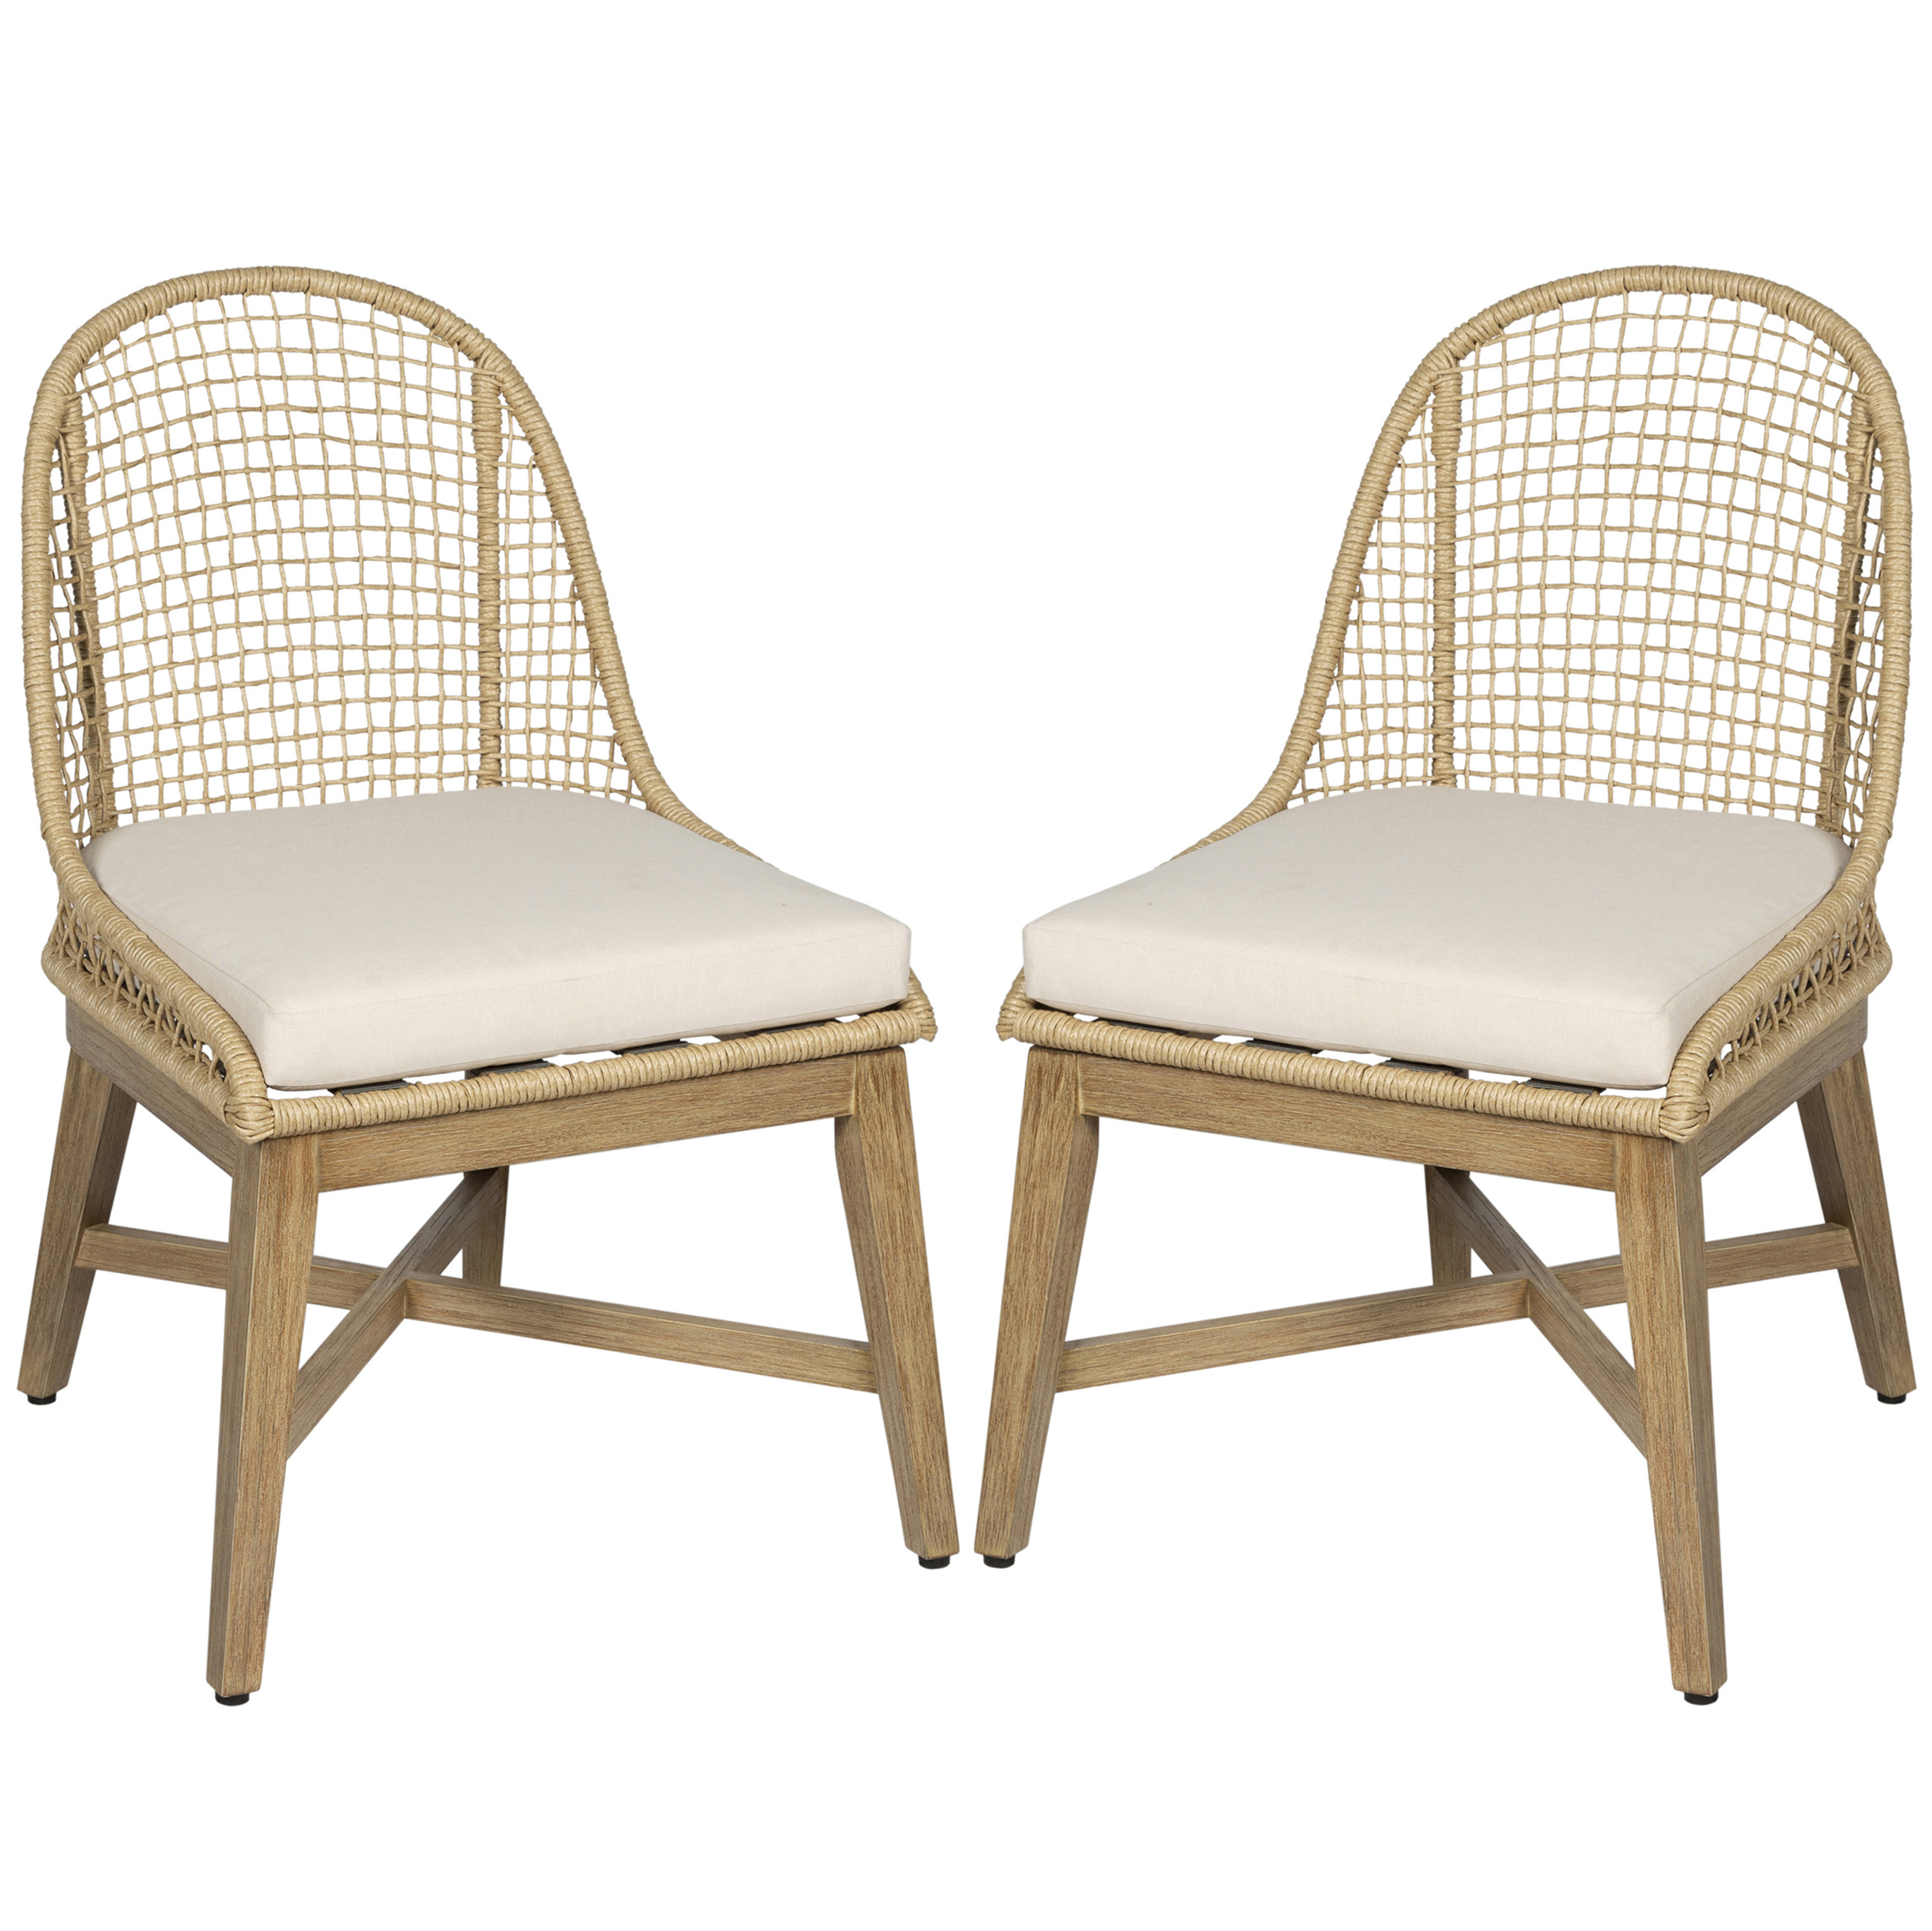 S/2 Sandy Outdoor Dining Chairs, Natural/Ivory